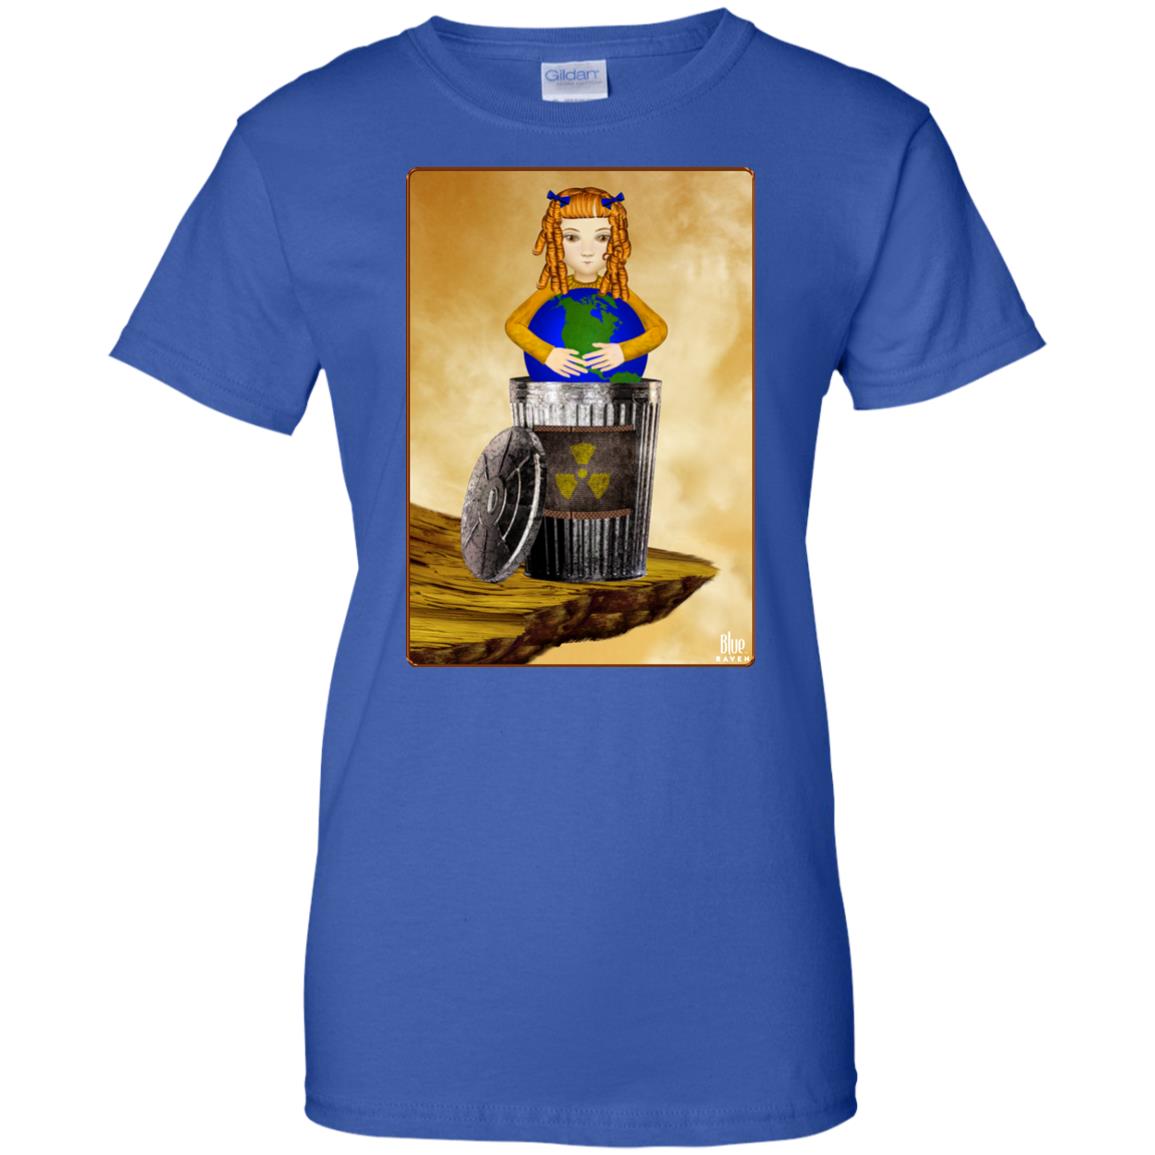 Don't Trash My World - Women's Relaxed Fit T-Shirt